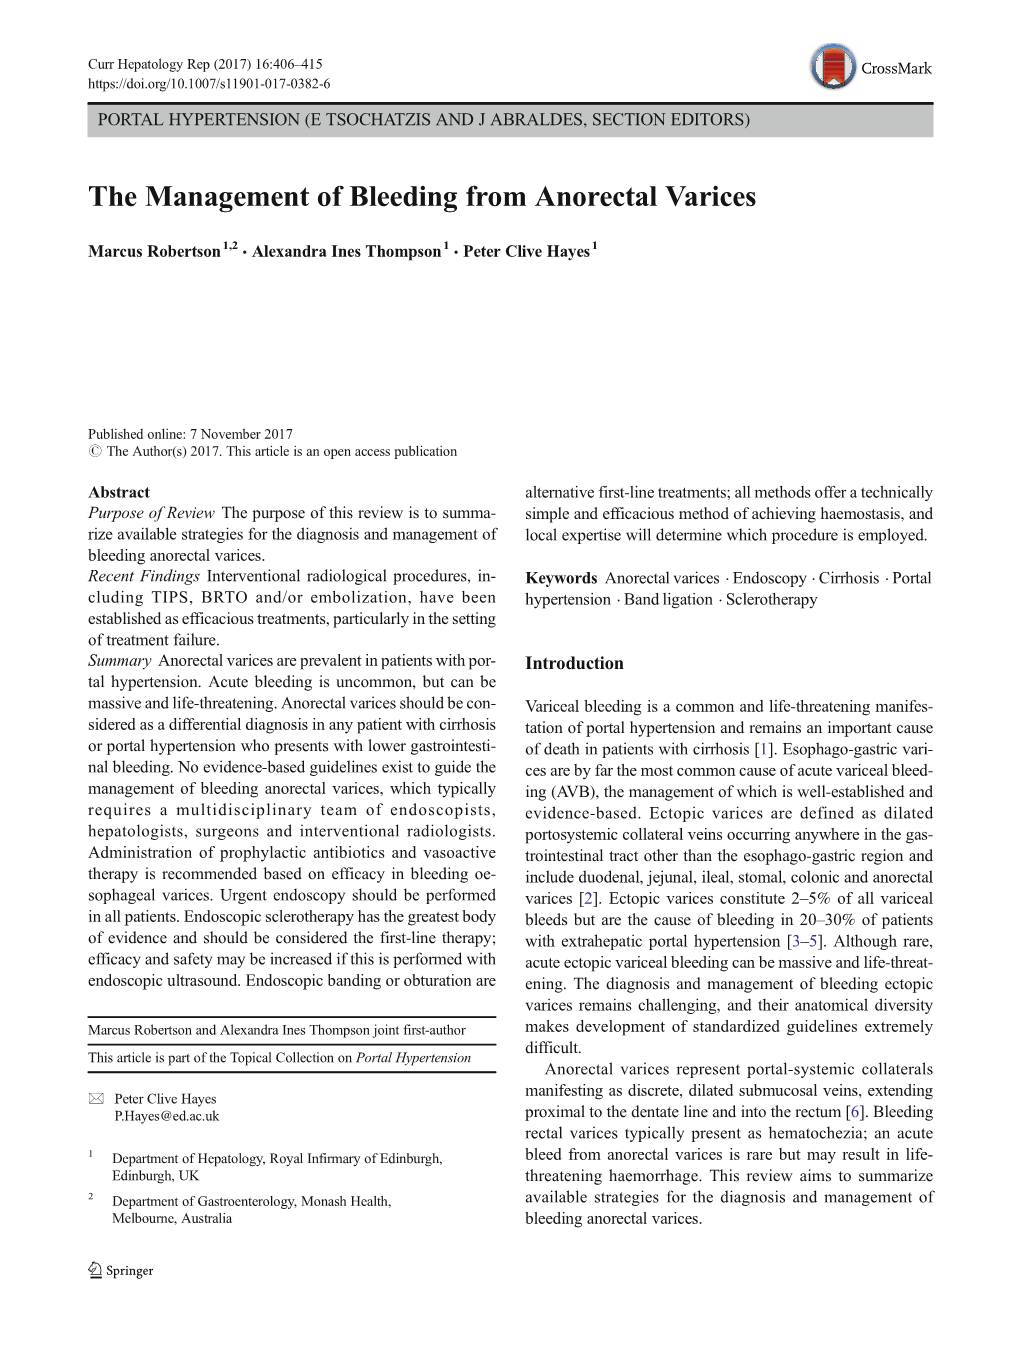 The Management of Bleeding from Anorectal Varices